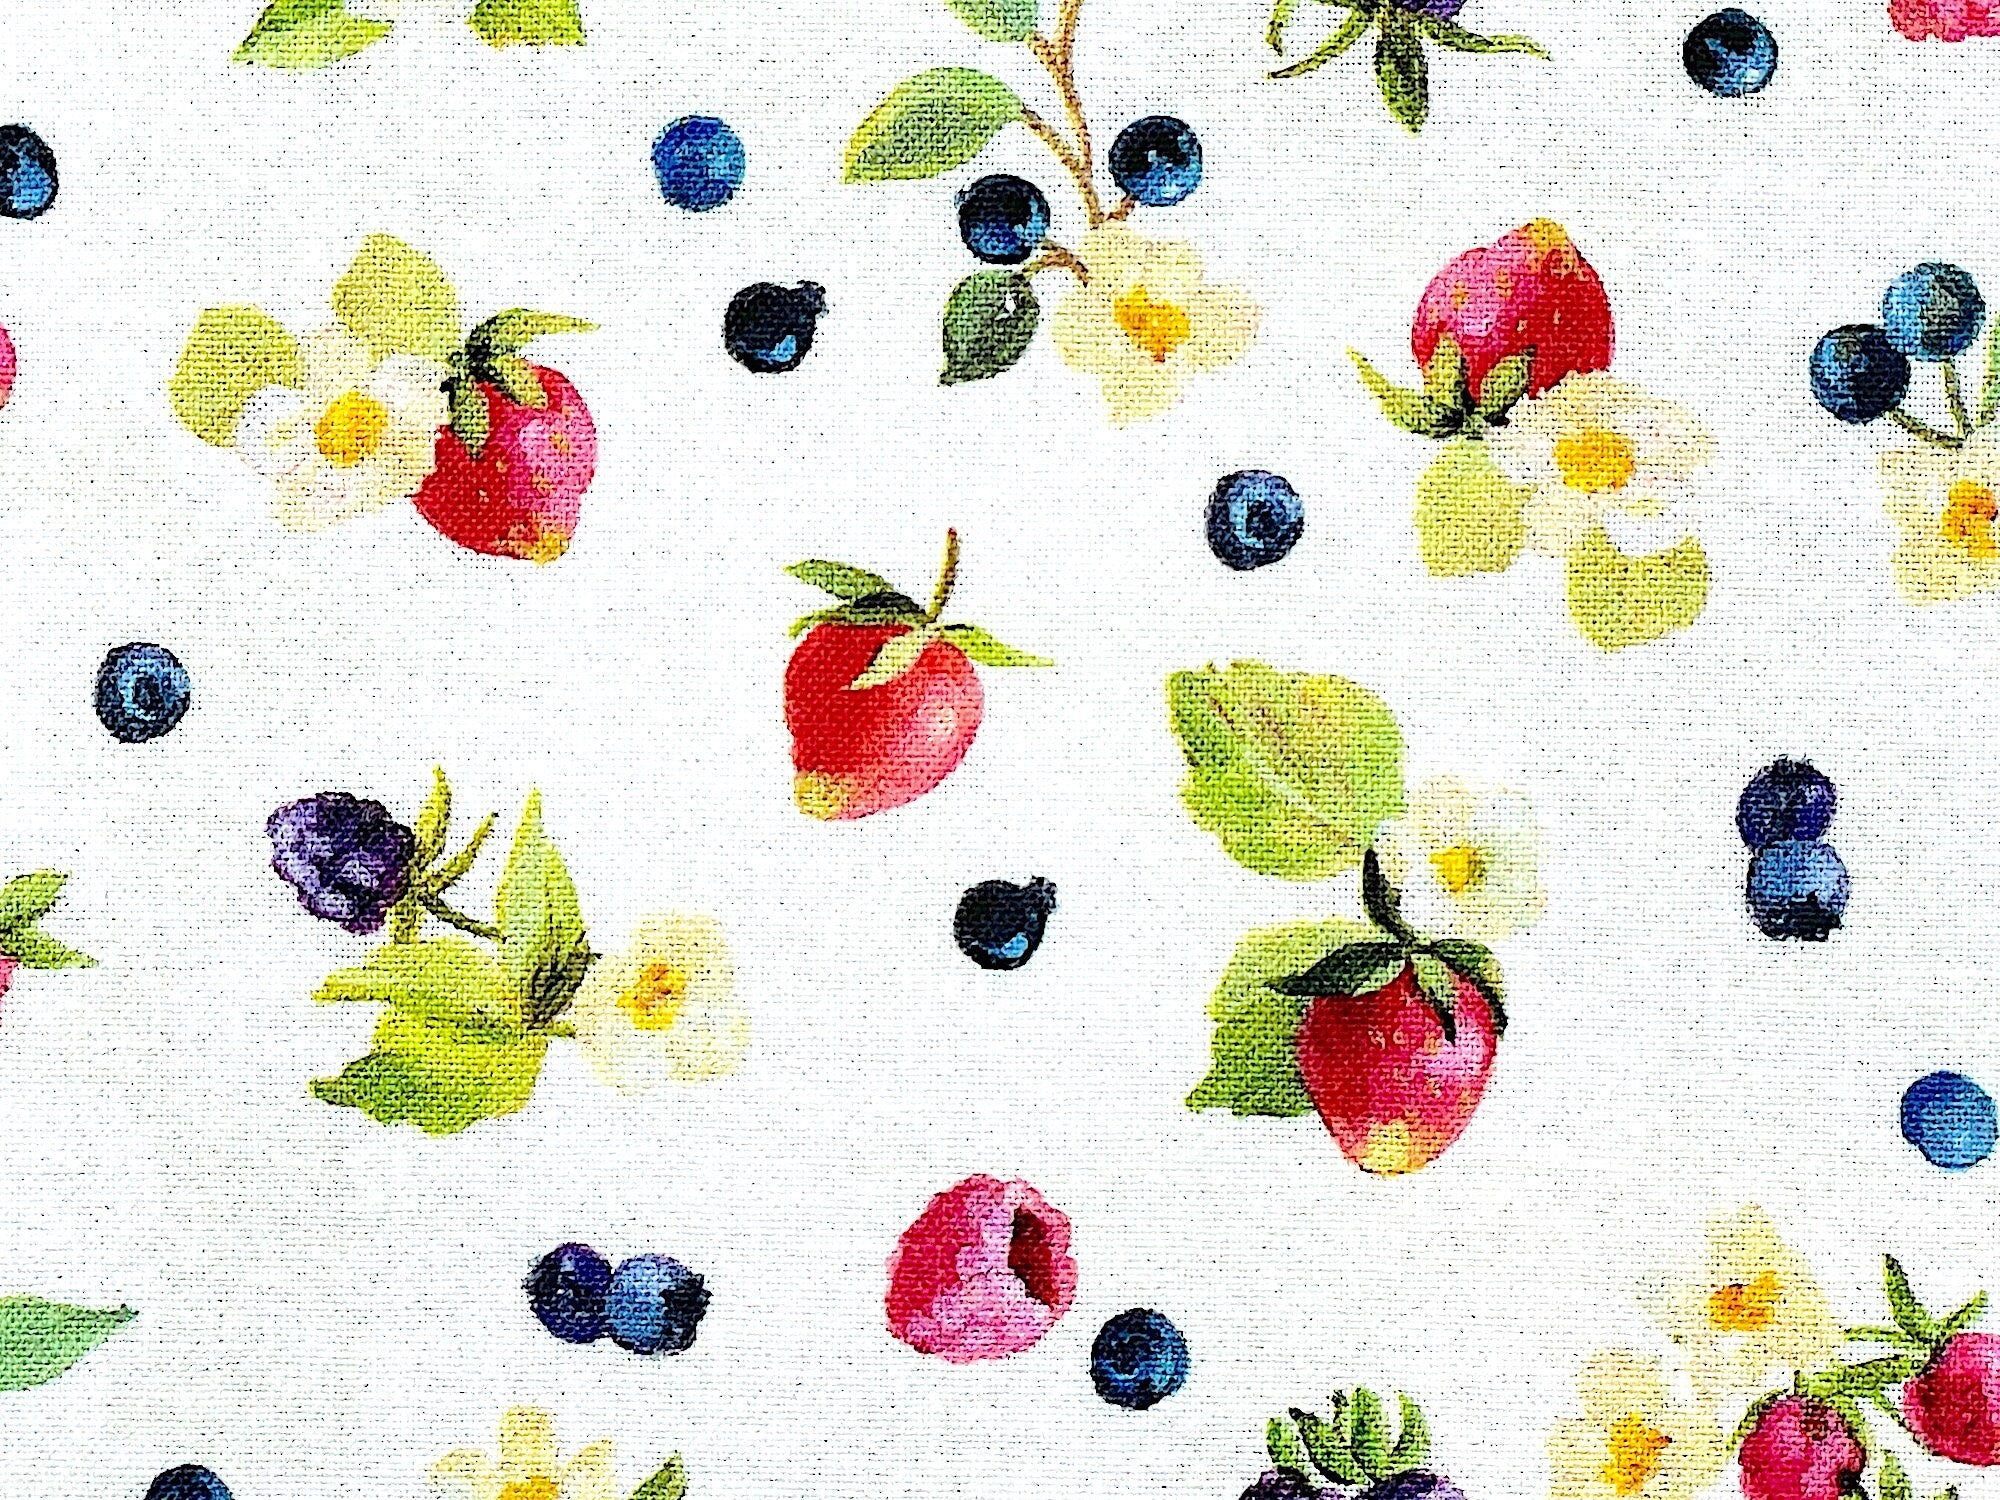 Close up of strawberries and blueberries.